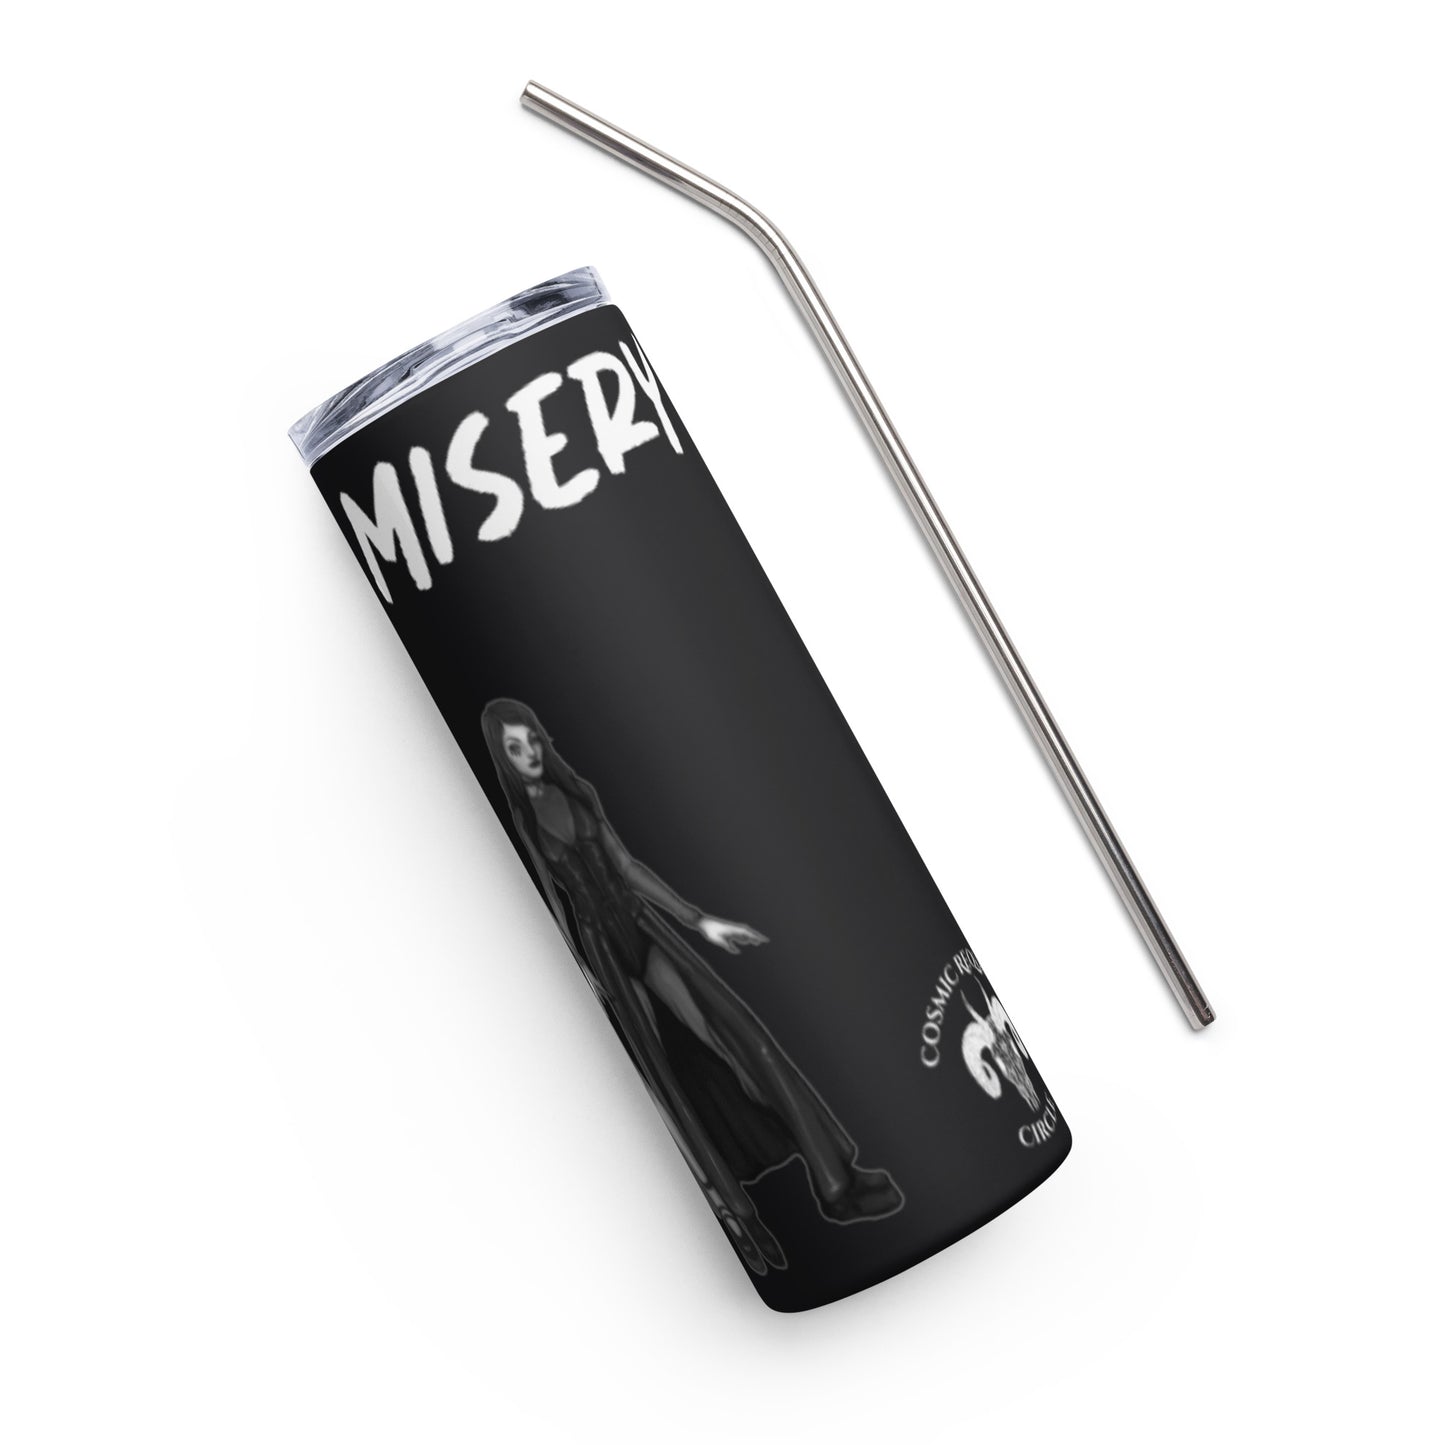 Death & Misery Stainless Steel Tumbler